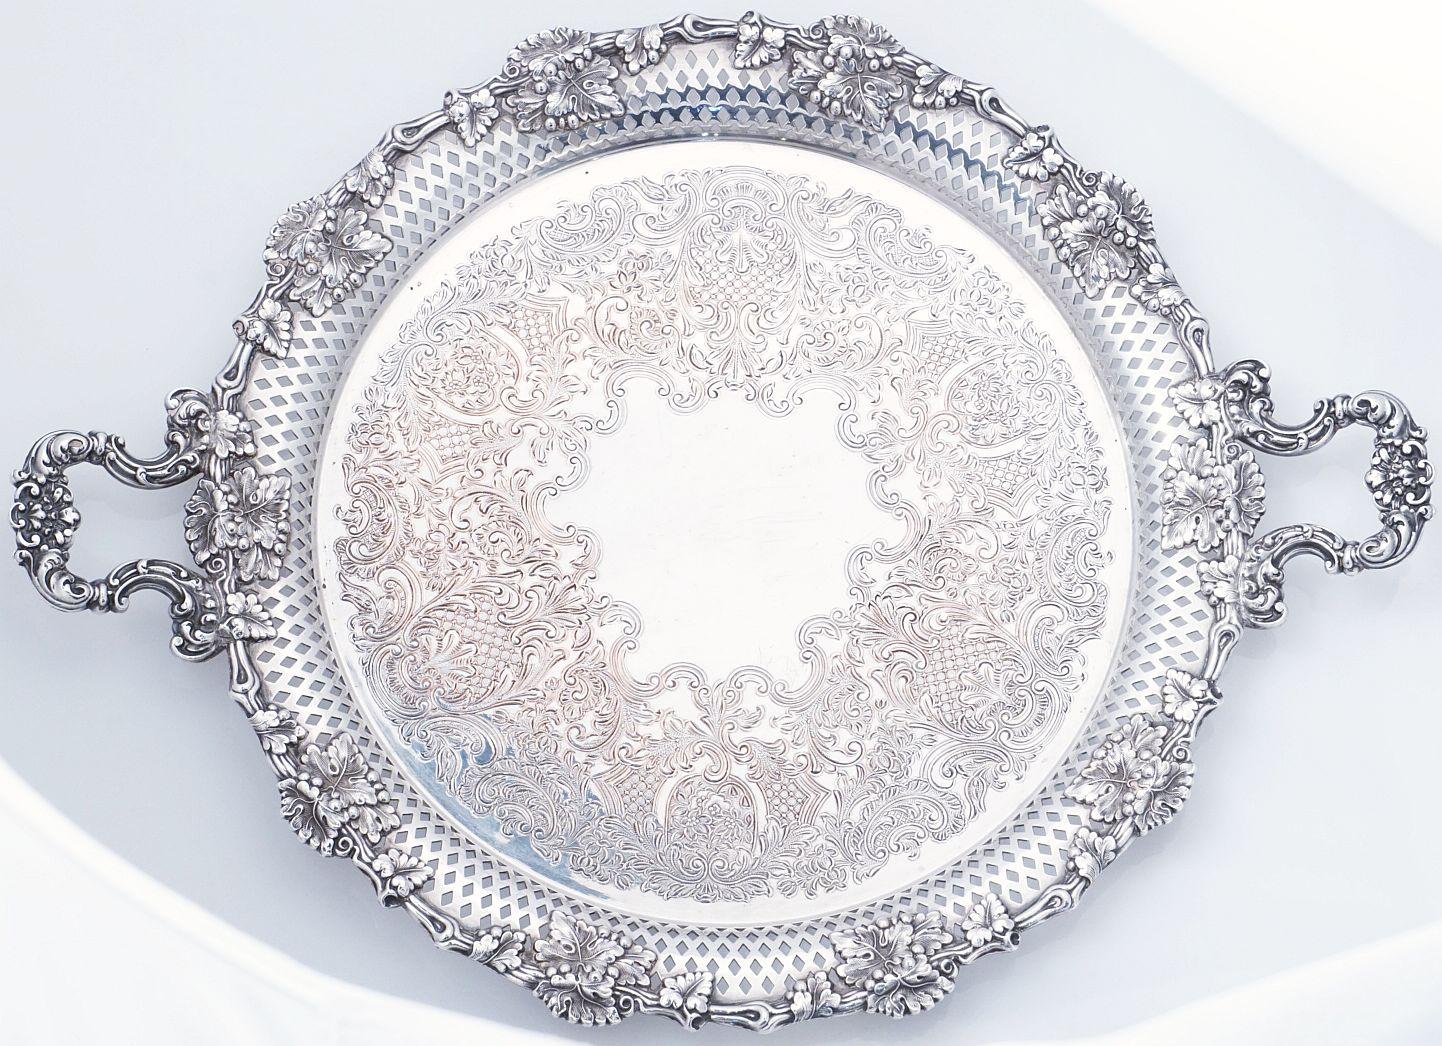  Large English Silver Round Serving or Drinks Tray with Handles For Sale 1